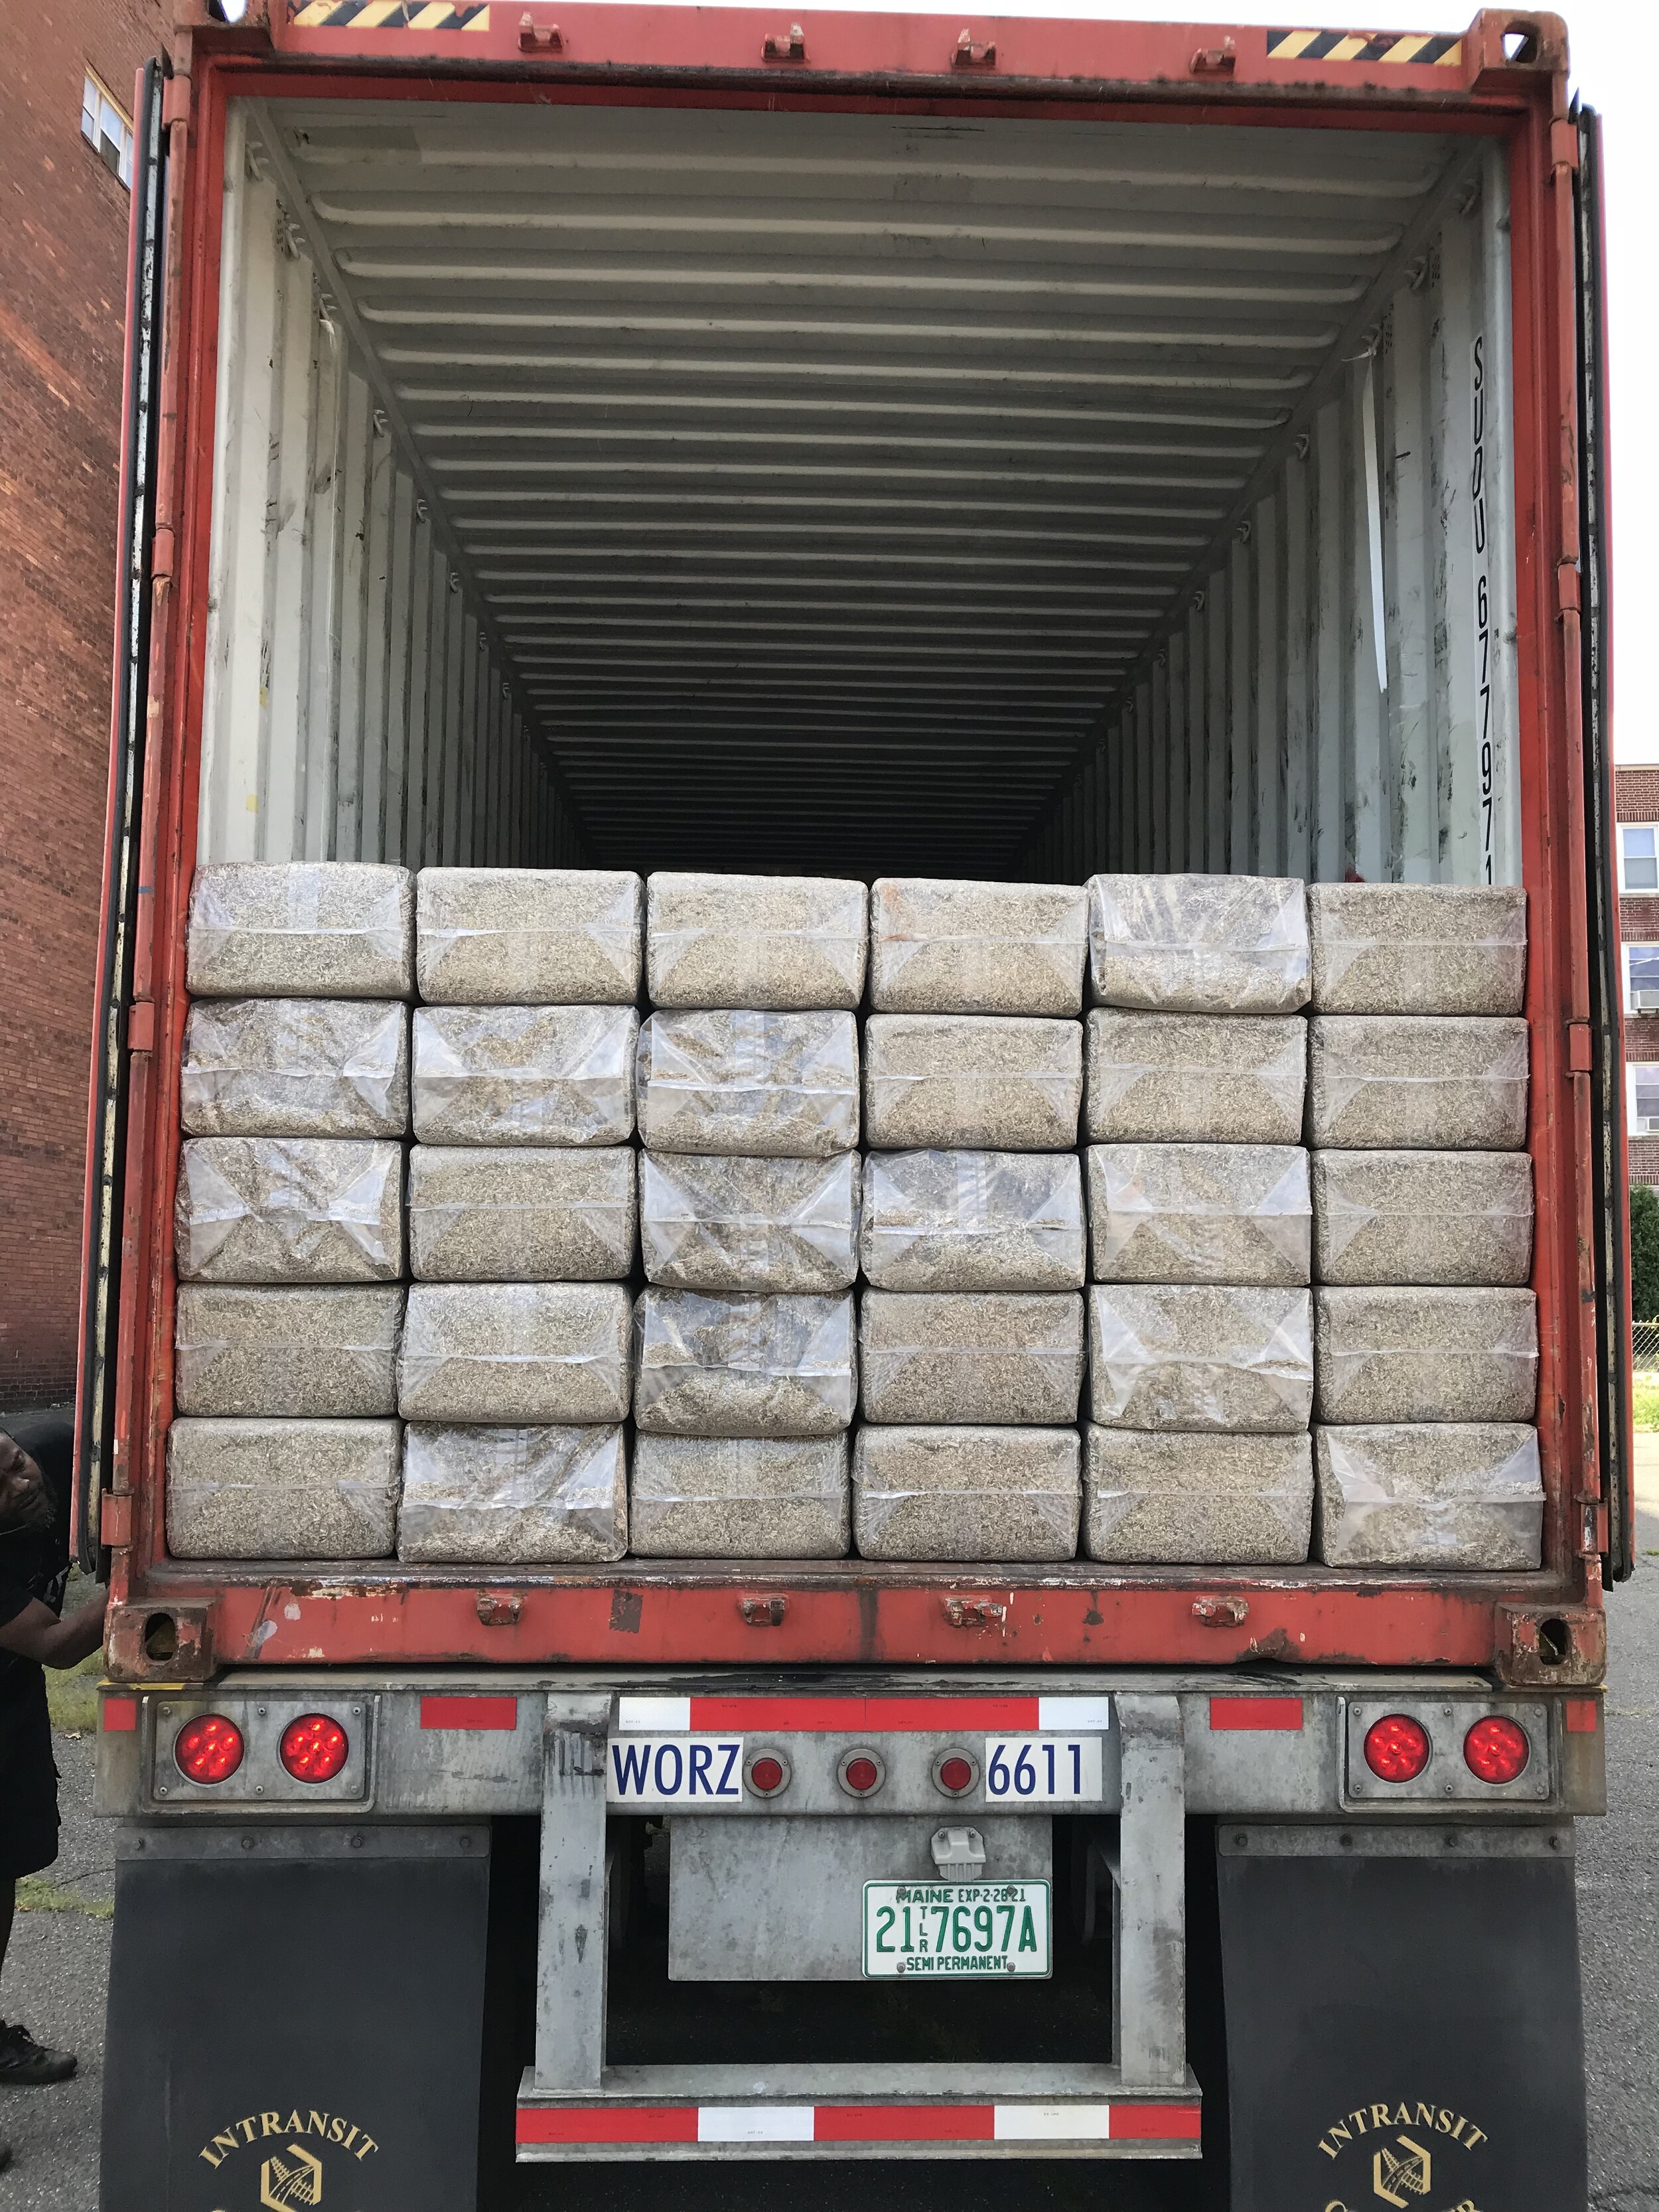 Hemp Hurd delivery from the Netherlands